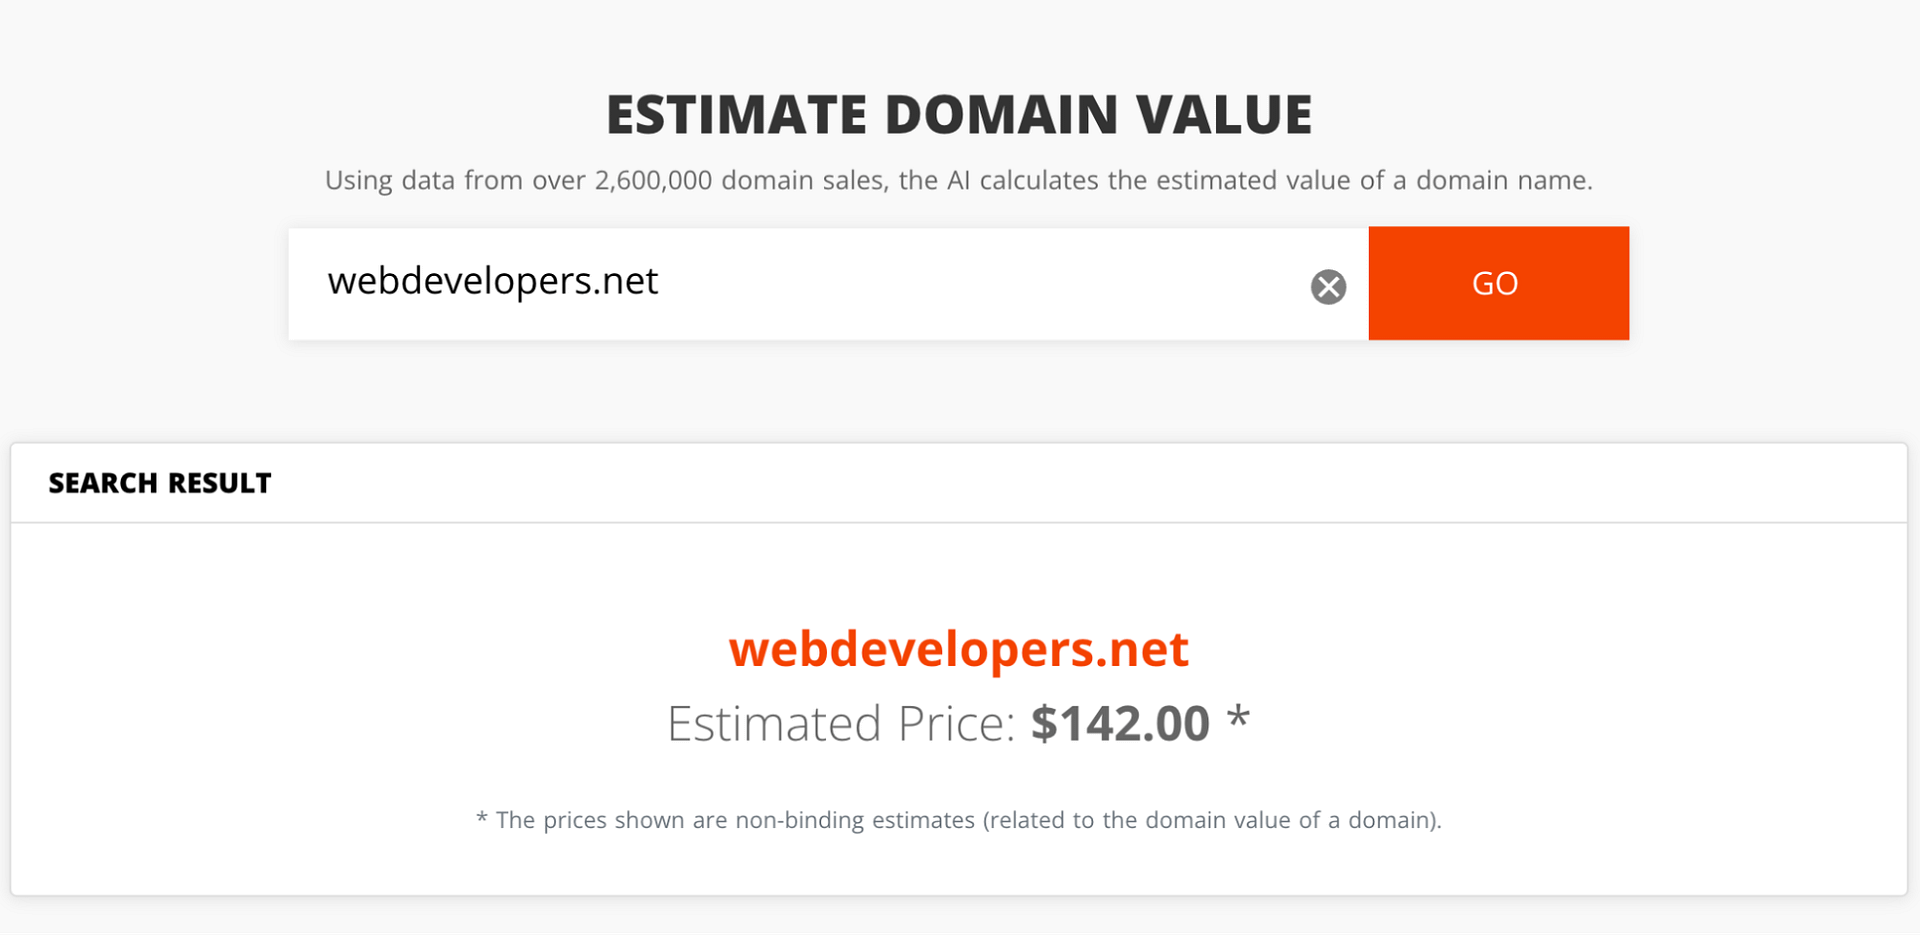 How much “webdevelopers.net” costs.